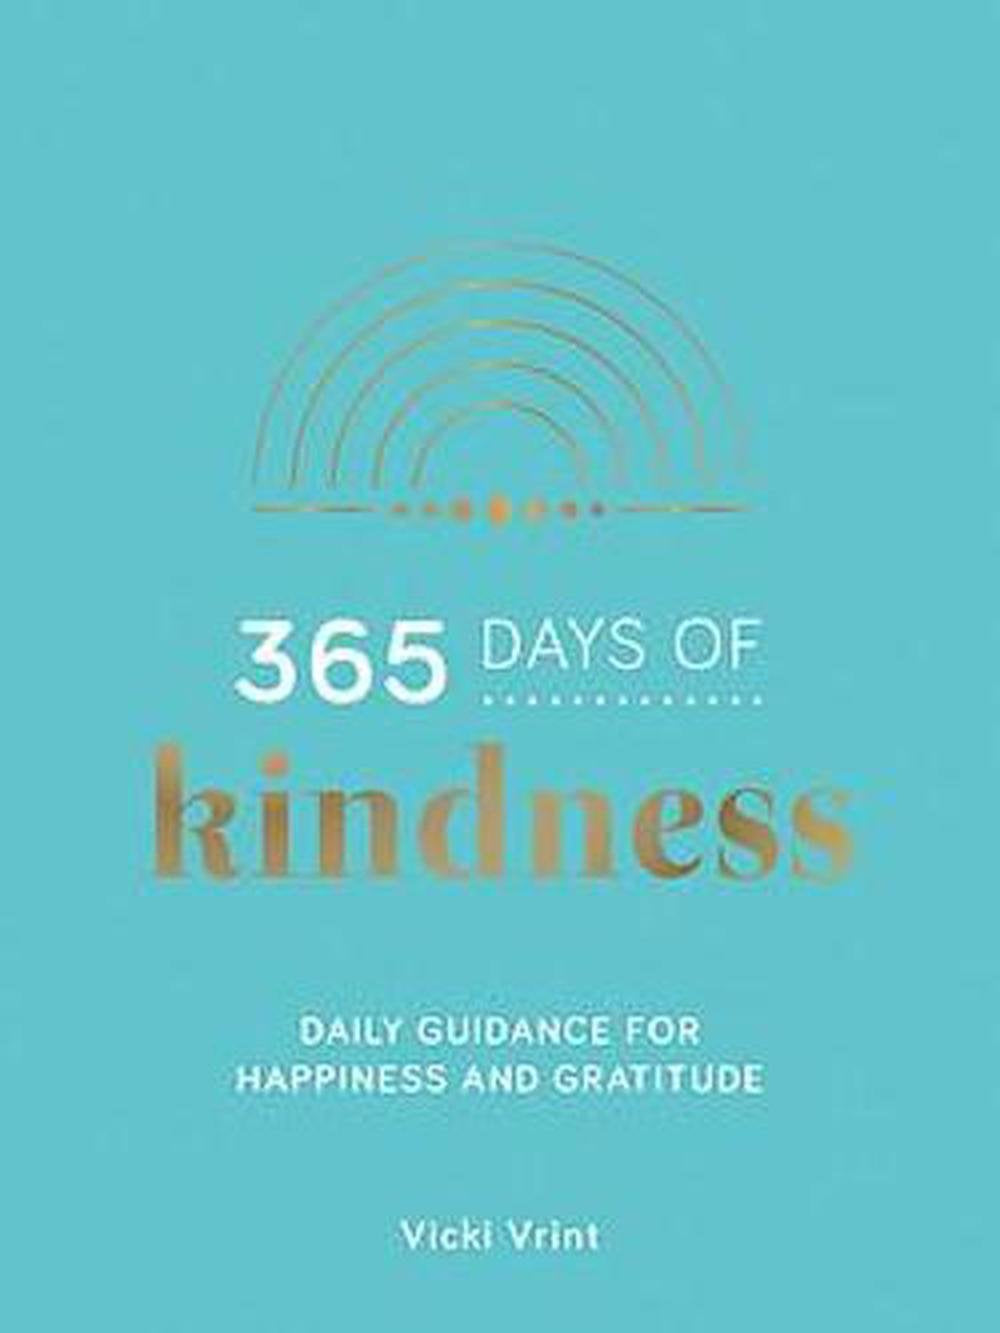 365 Days Of Kindness Book